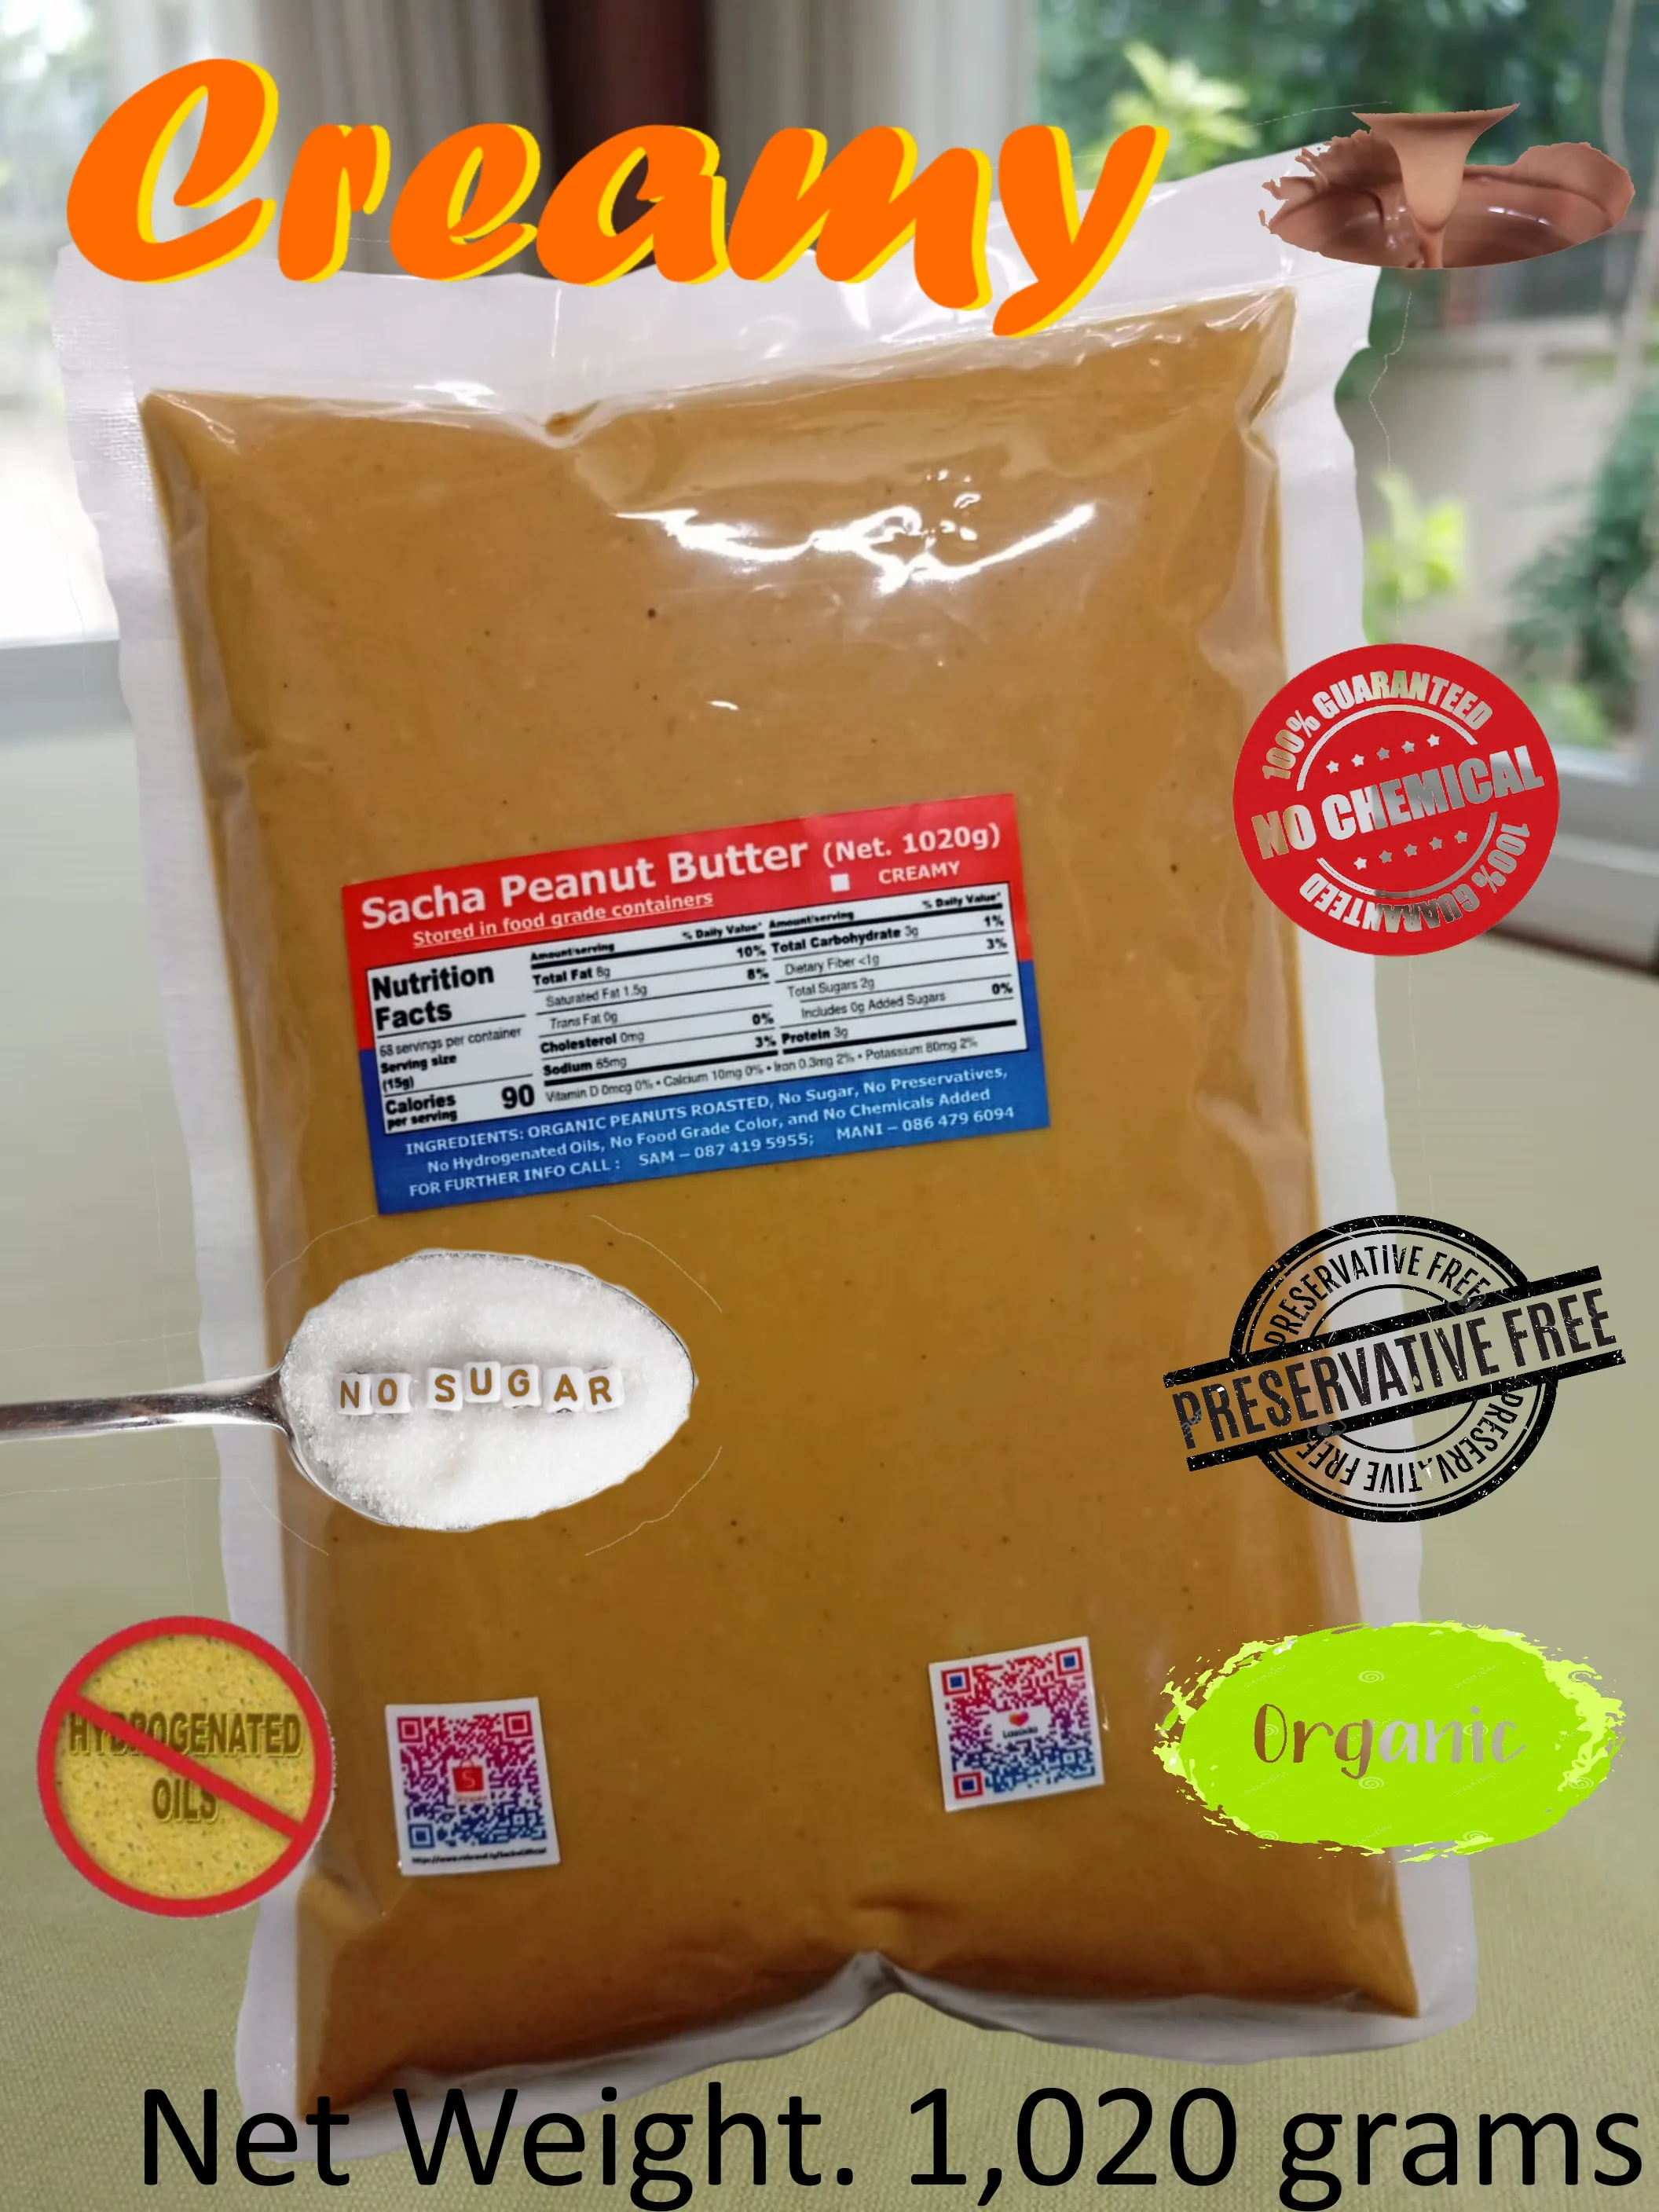 Sacha Peanut Butter (Creamy) All Natural Organic (1,020 grams) - Free Delivery, ซาช่า-เนยถั่ว (ส่งฟรี)